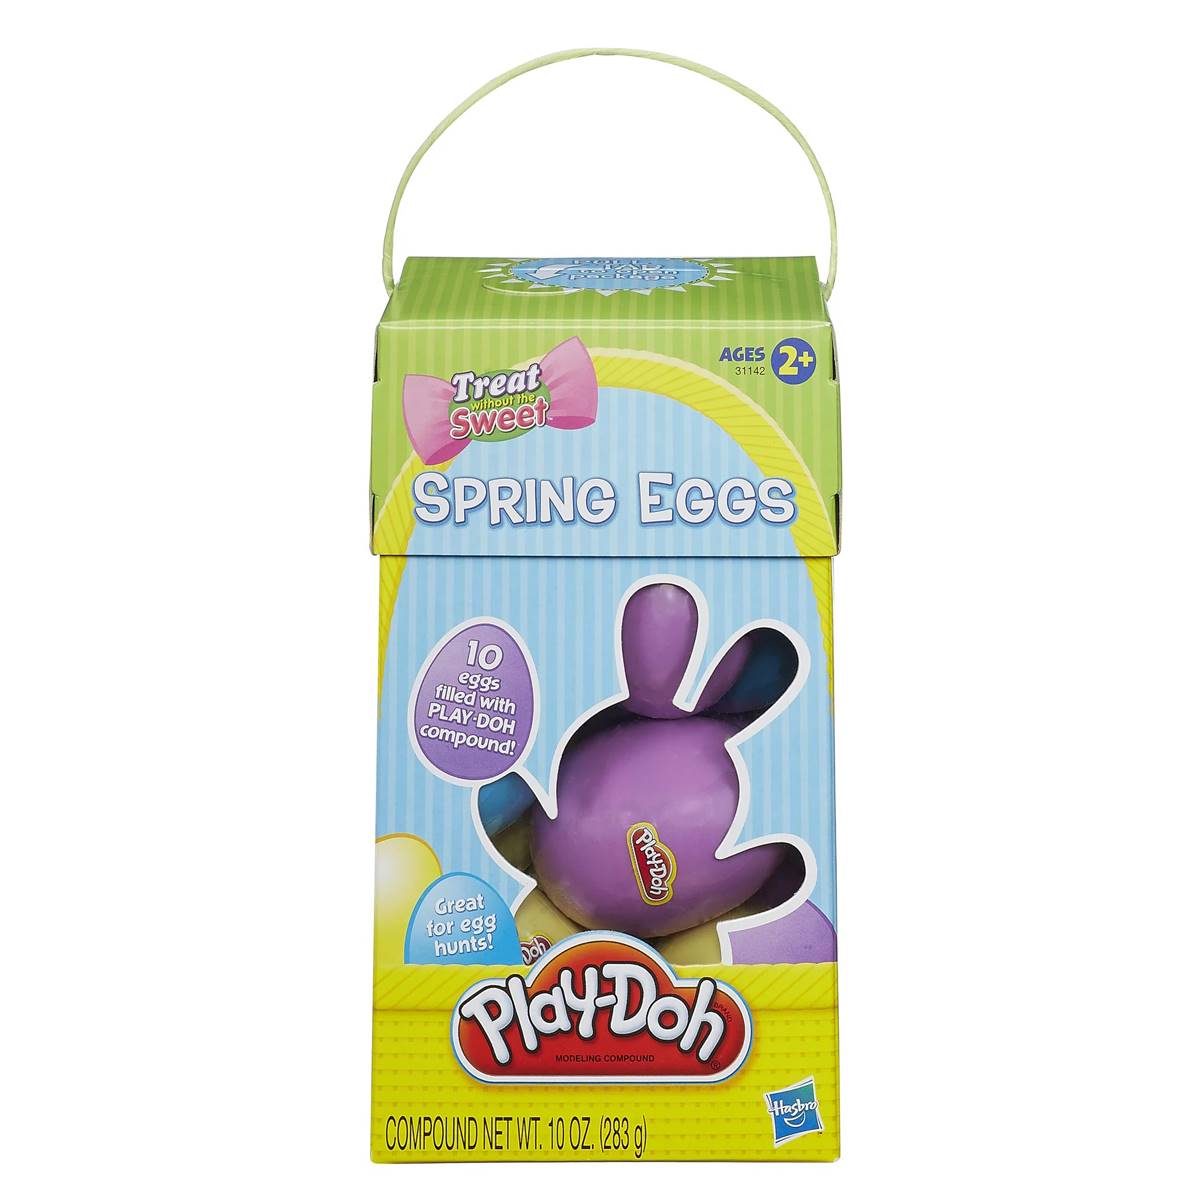 Play-Doh(R) 3.5in. Spring Eggs